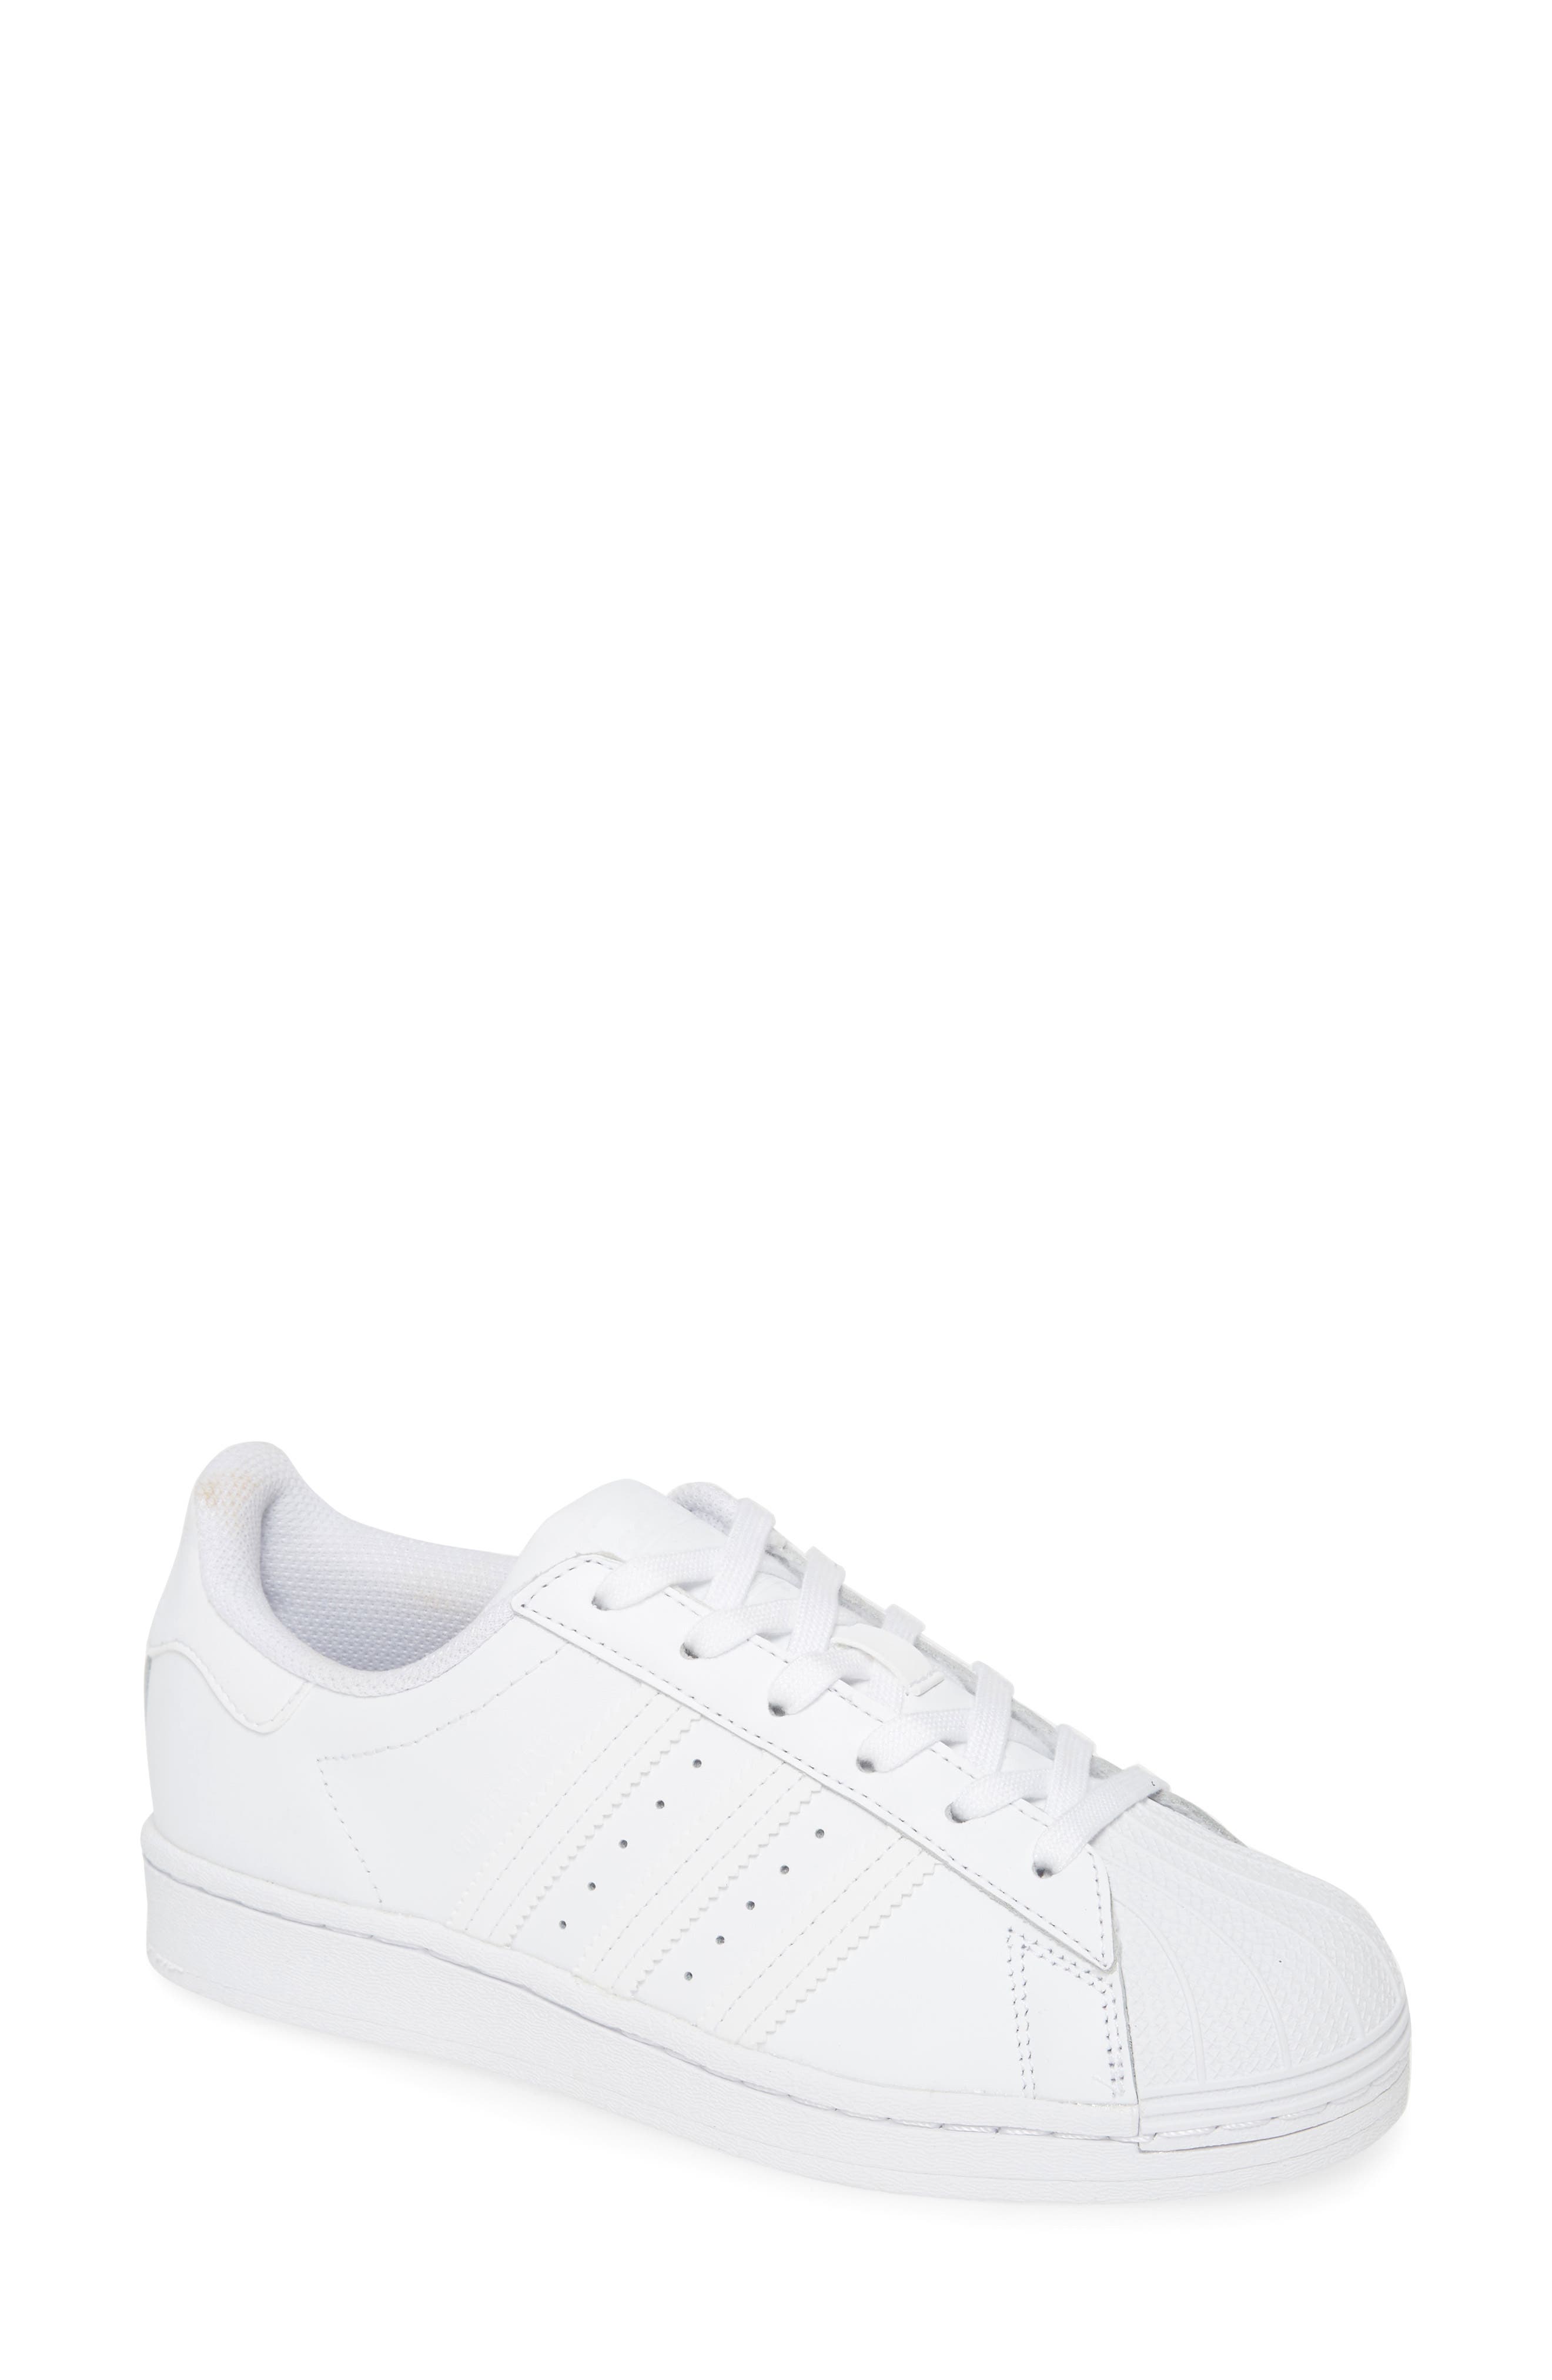 Women's adidas Shoes | Nordstrom